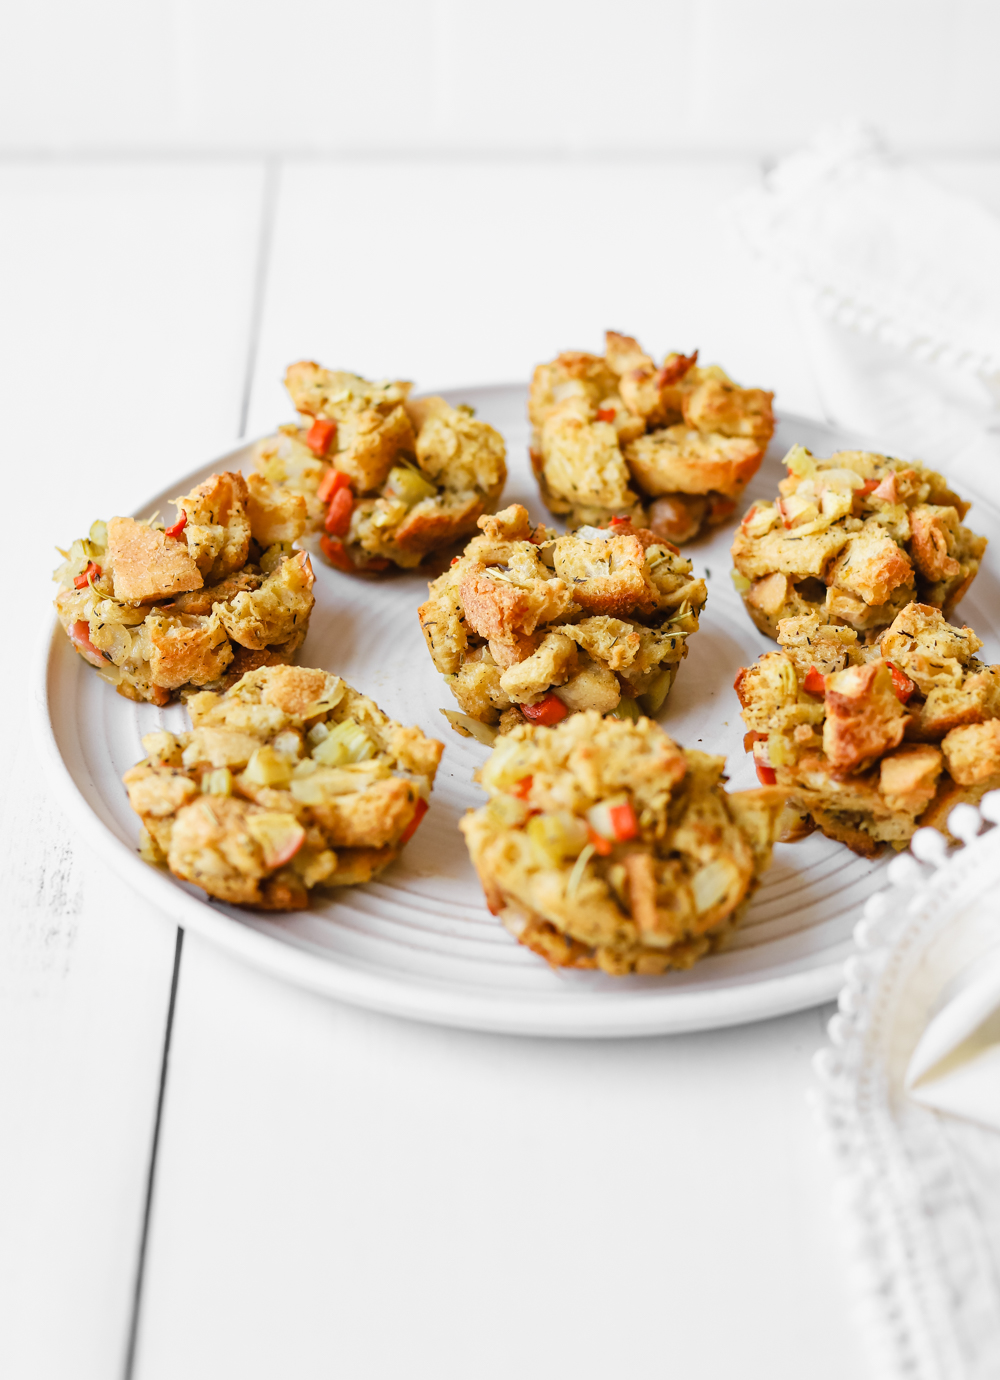 Homemade vegan stuffing muffins on a large white plate.